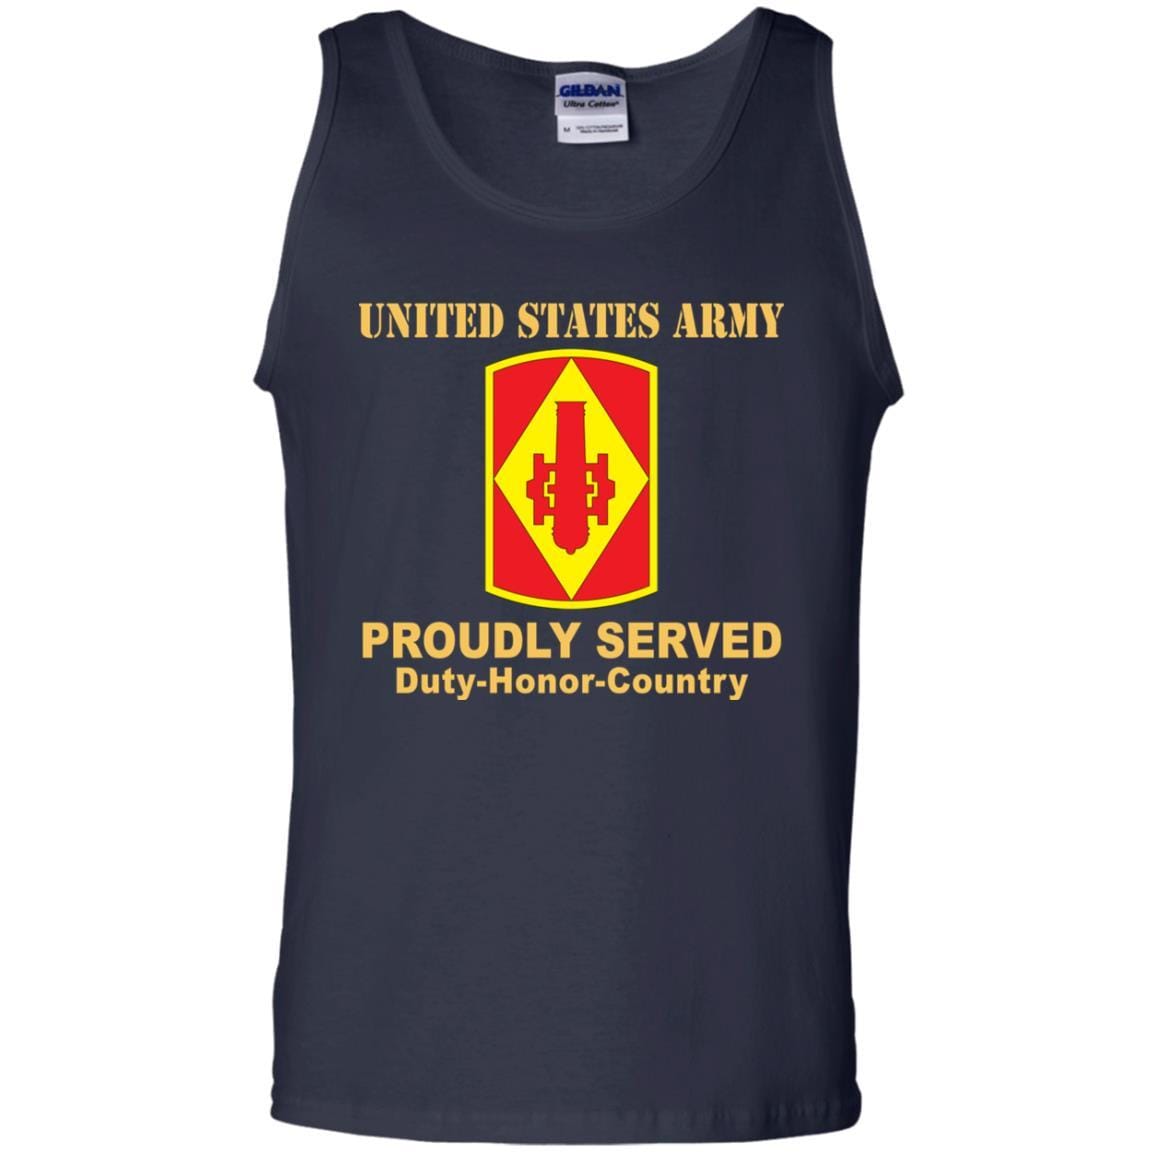 US ARMY 75TH FIRES BRIGADE - Proudly Served T-Shirt On Front For Men-TShirt-Army-Veterans Nation